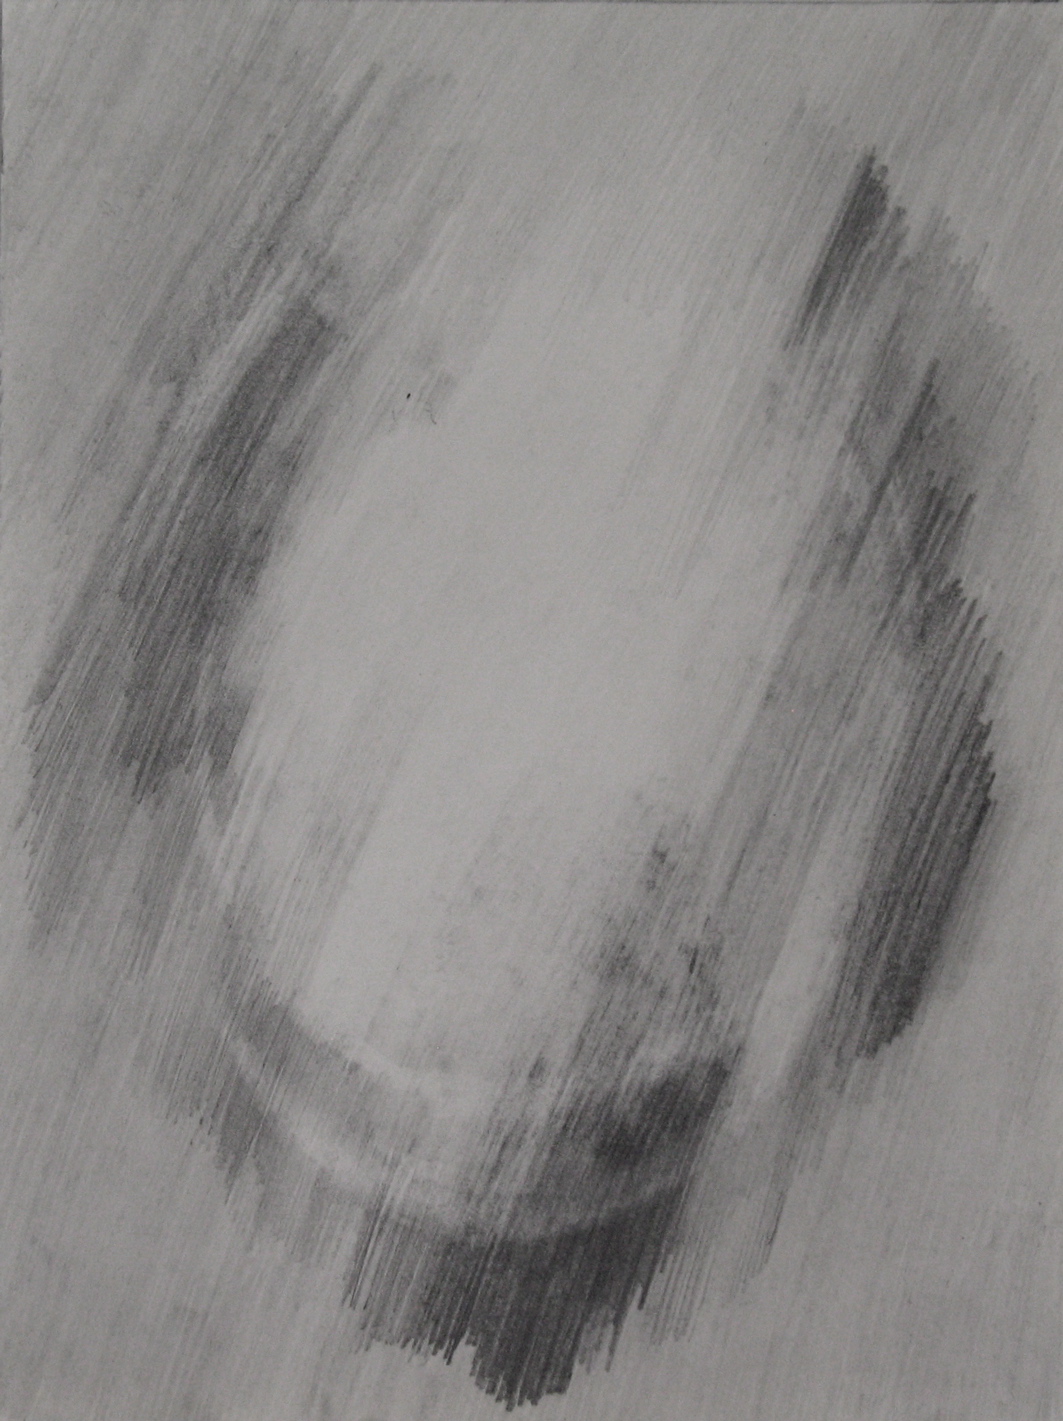 Untitled (2009) Pencil on paper, 210 x 157mm 